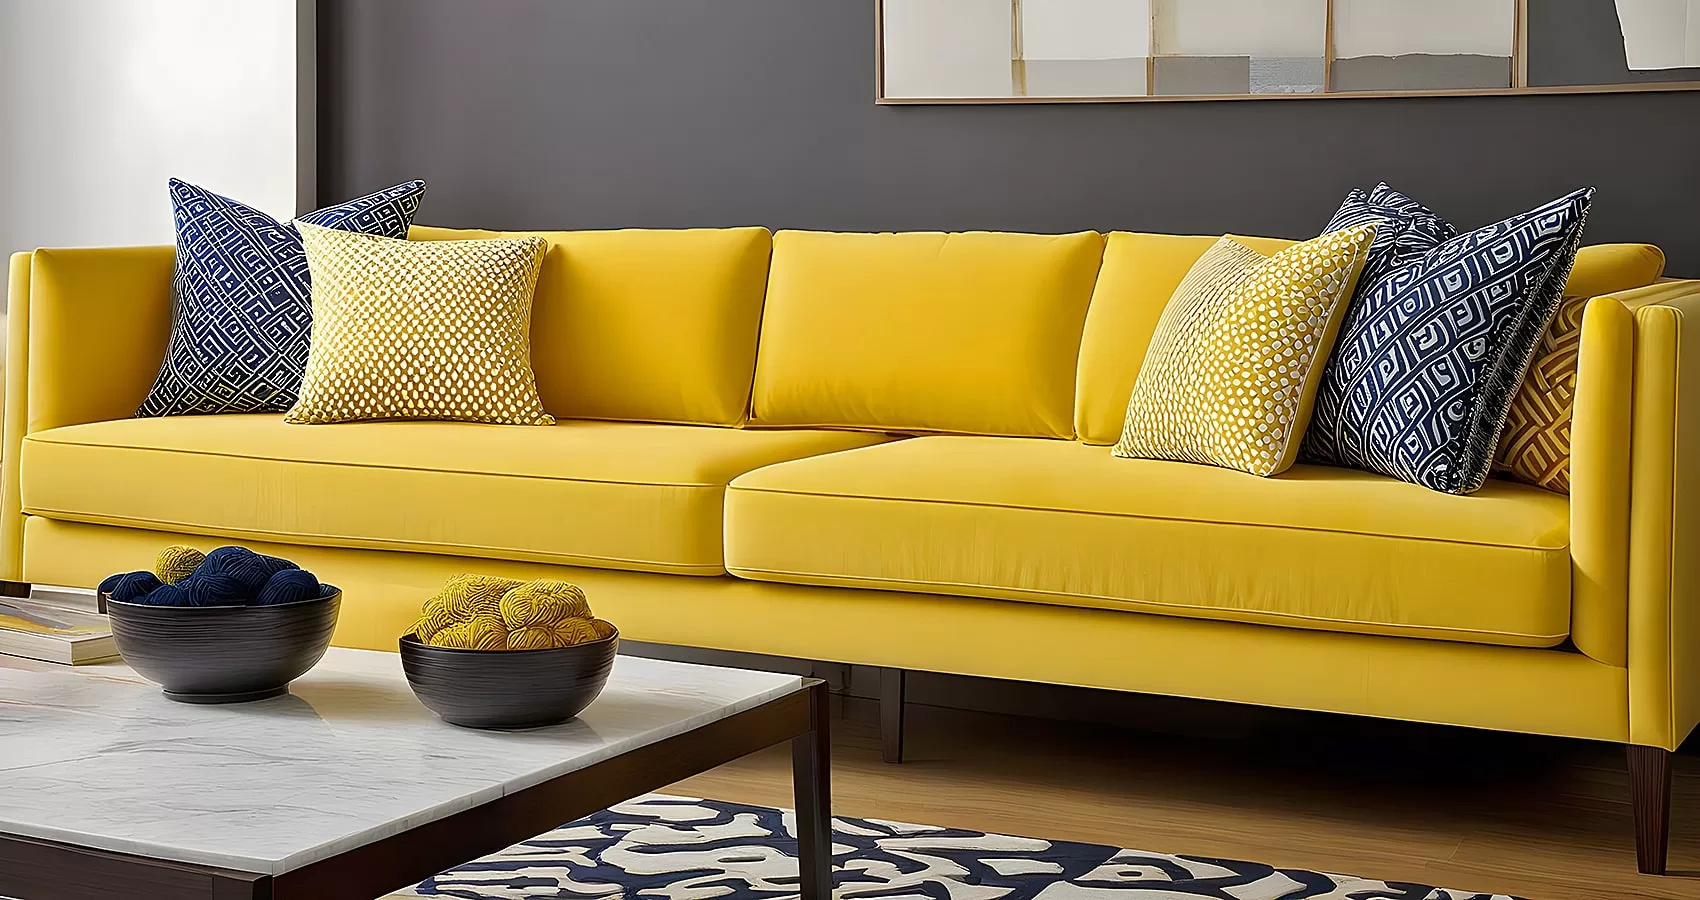 Yellow Couch Pillows | Yellow Sofa Pillows: Styling with Comfort